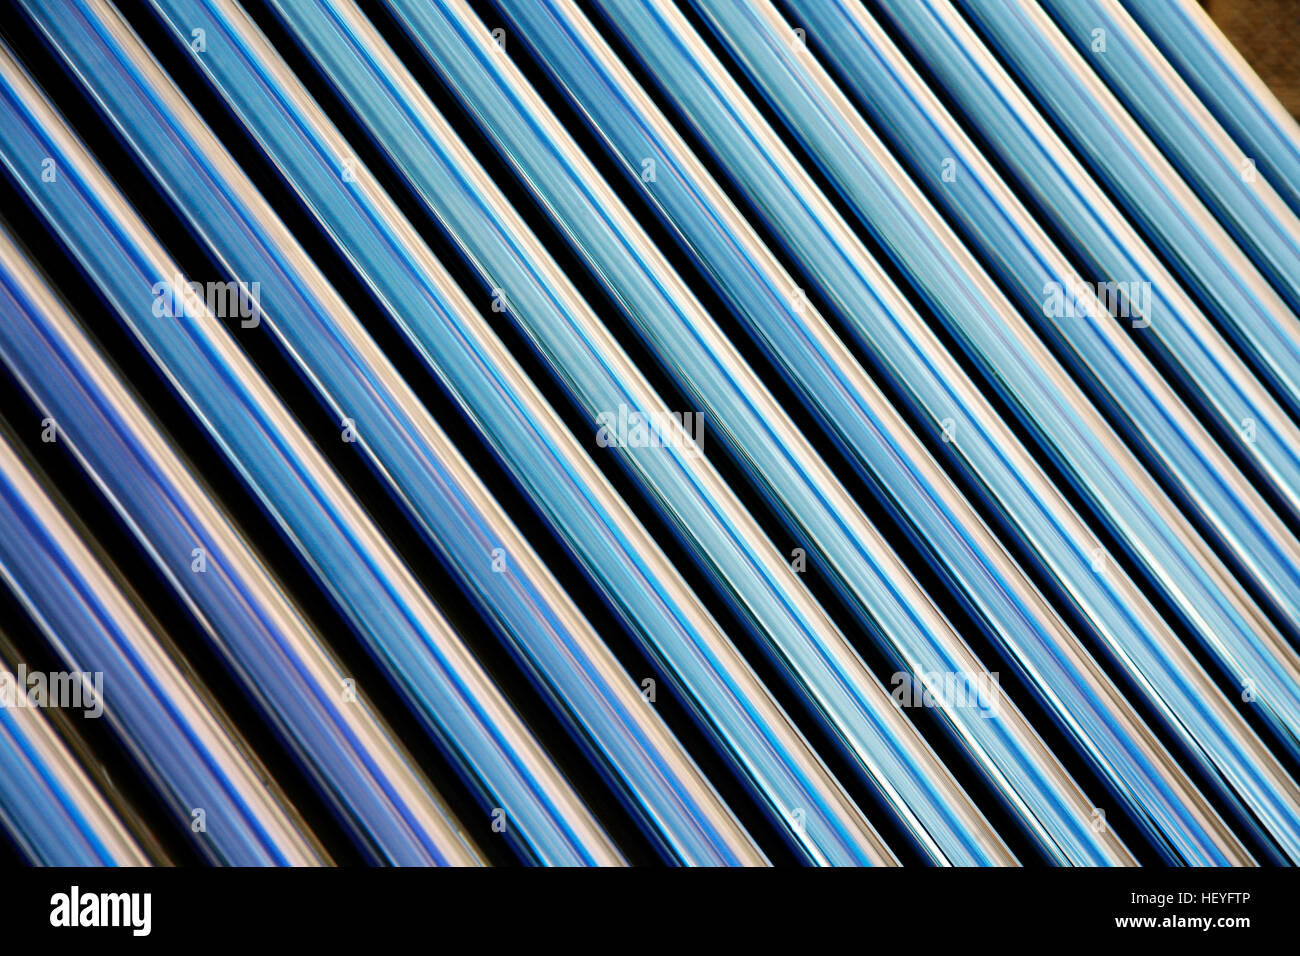 Tubes of a solar heating system. Elements of solar heating system Stock Photo